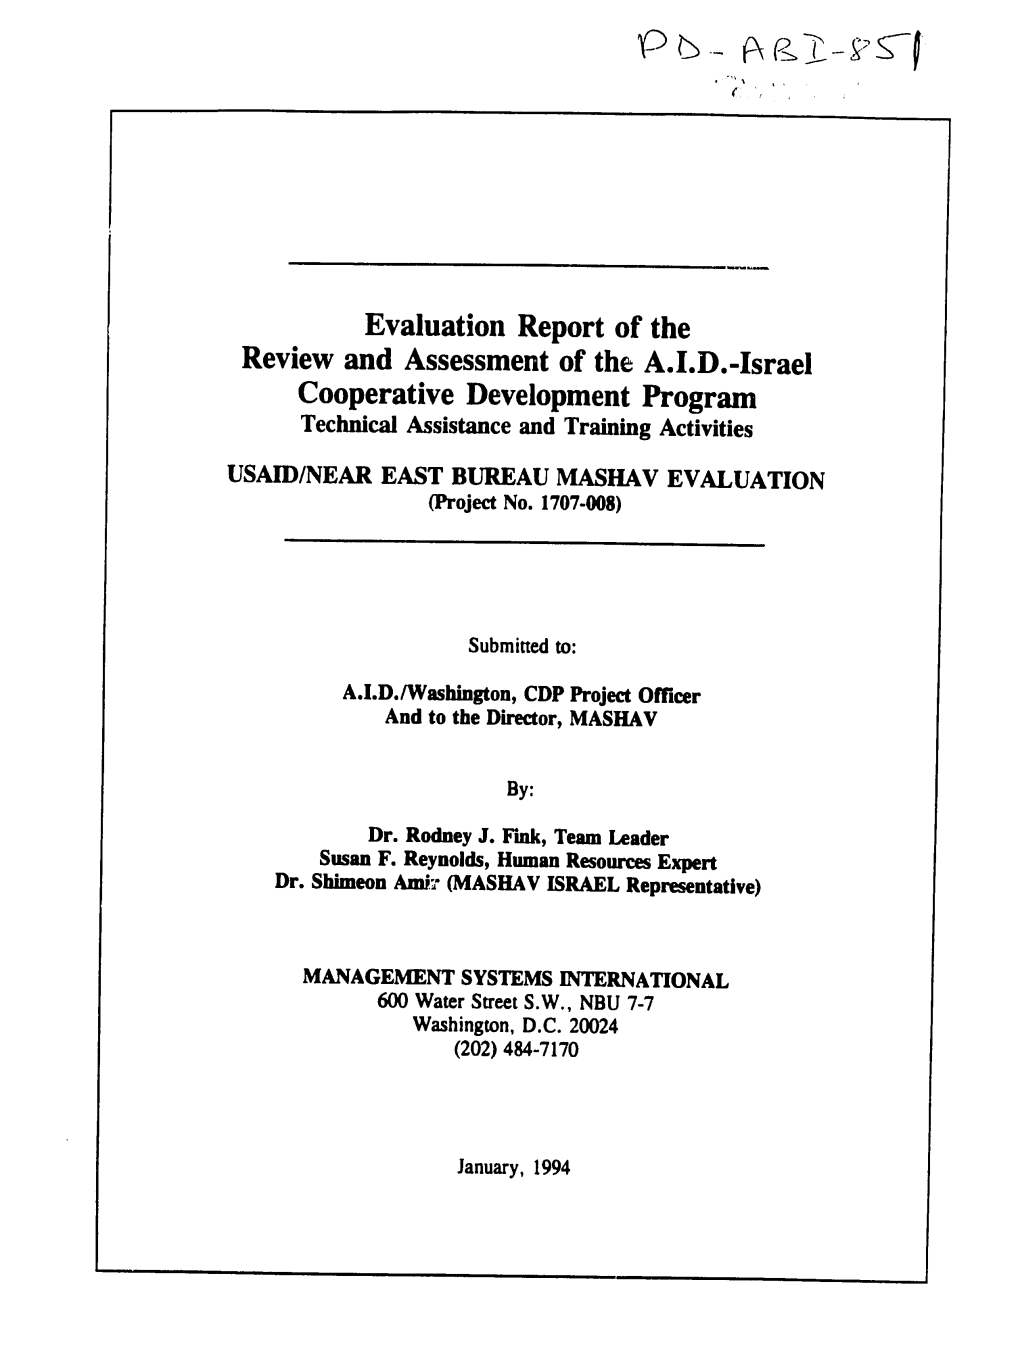 Evaluation Report of the Review and Assessment of the A.I.D.-Israel